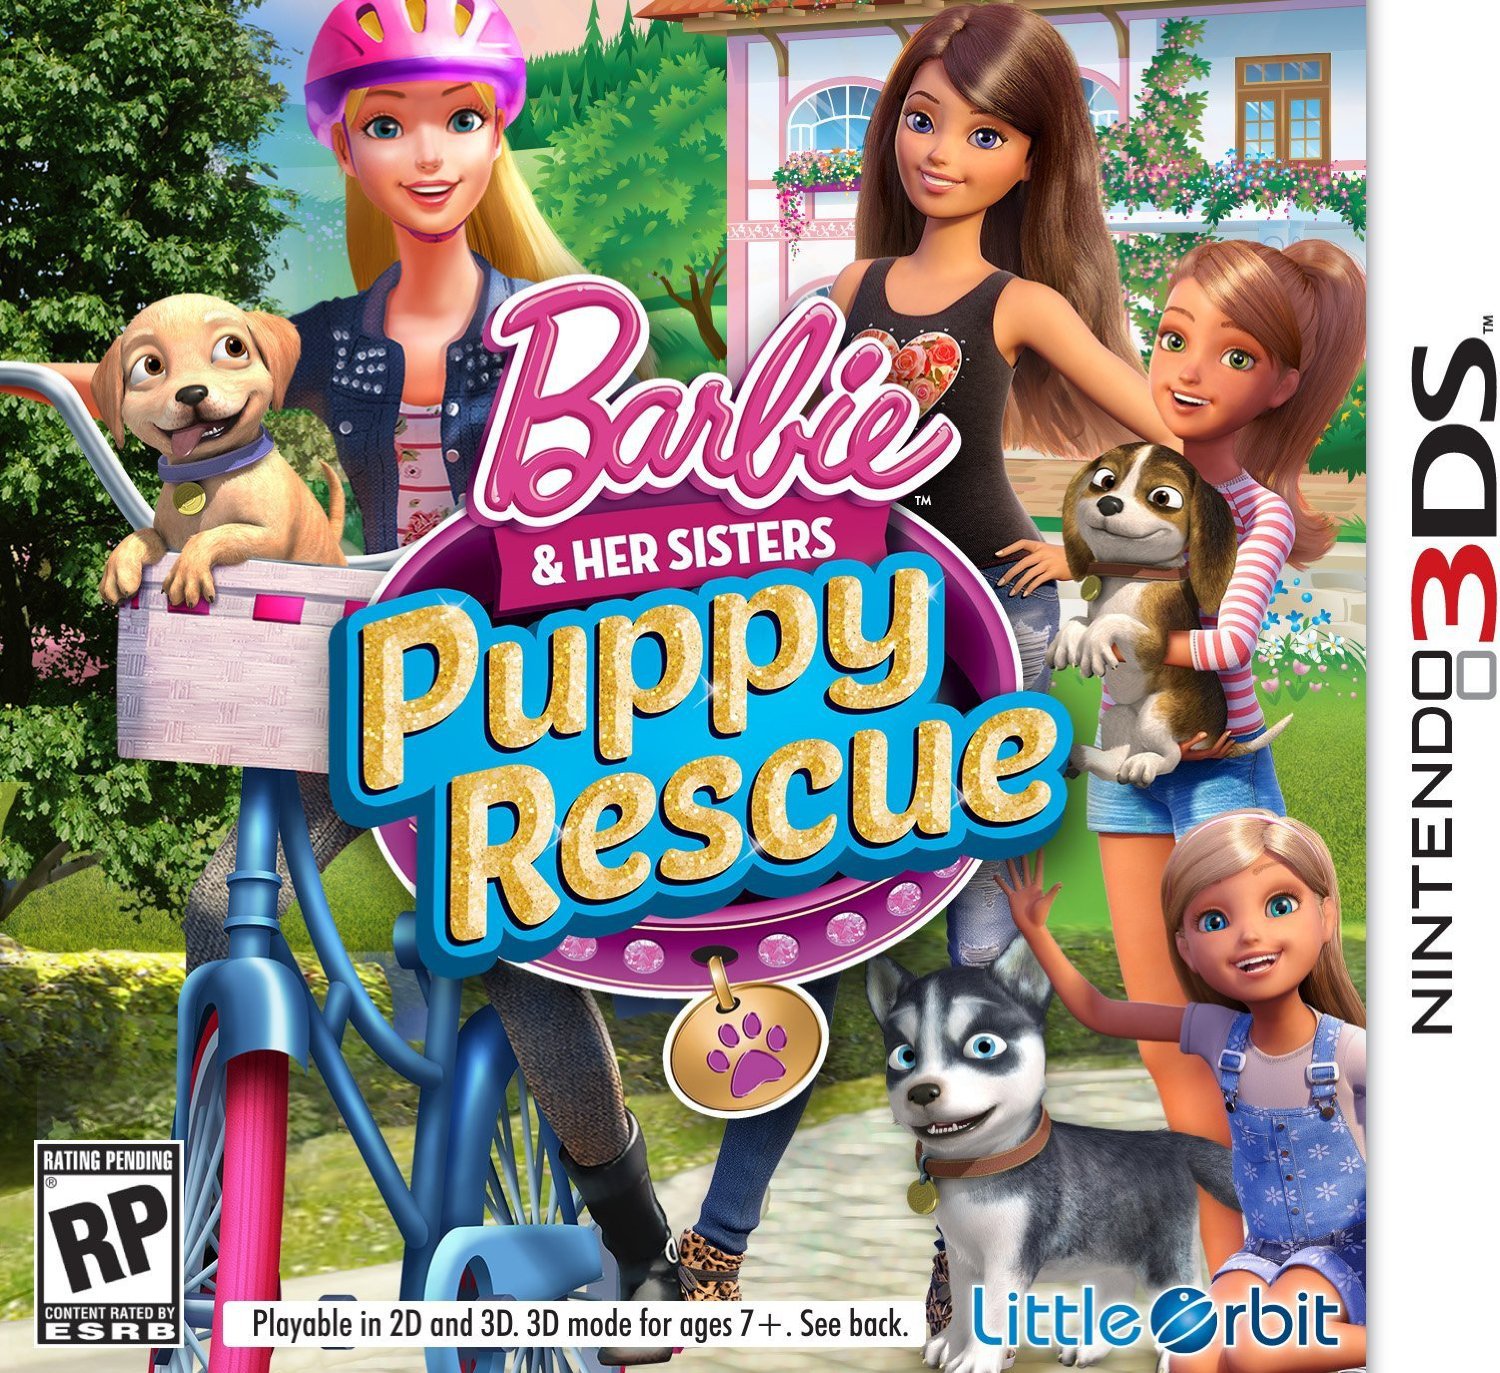 Barbie & Her Sisters Puppy